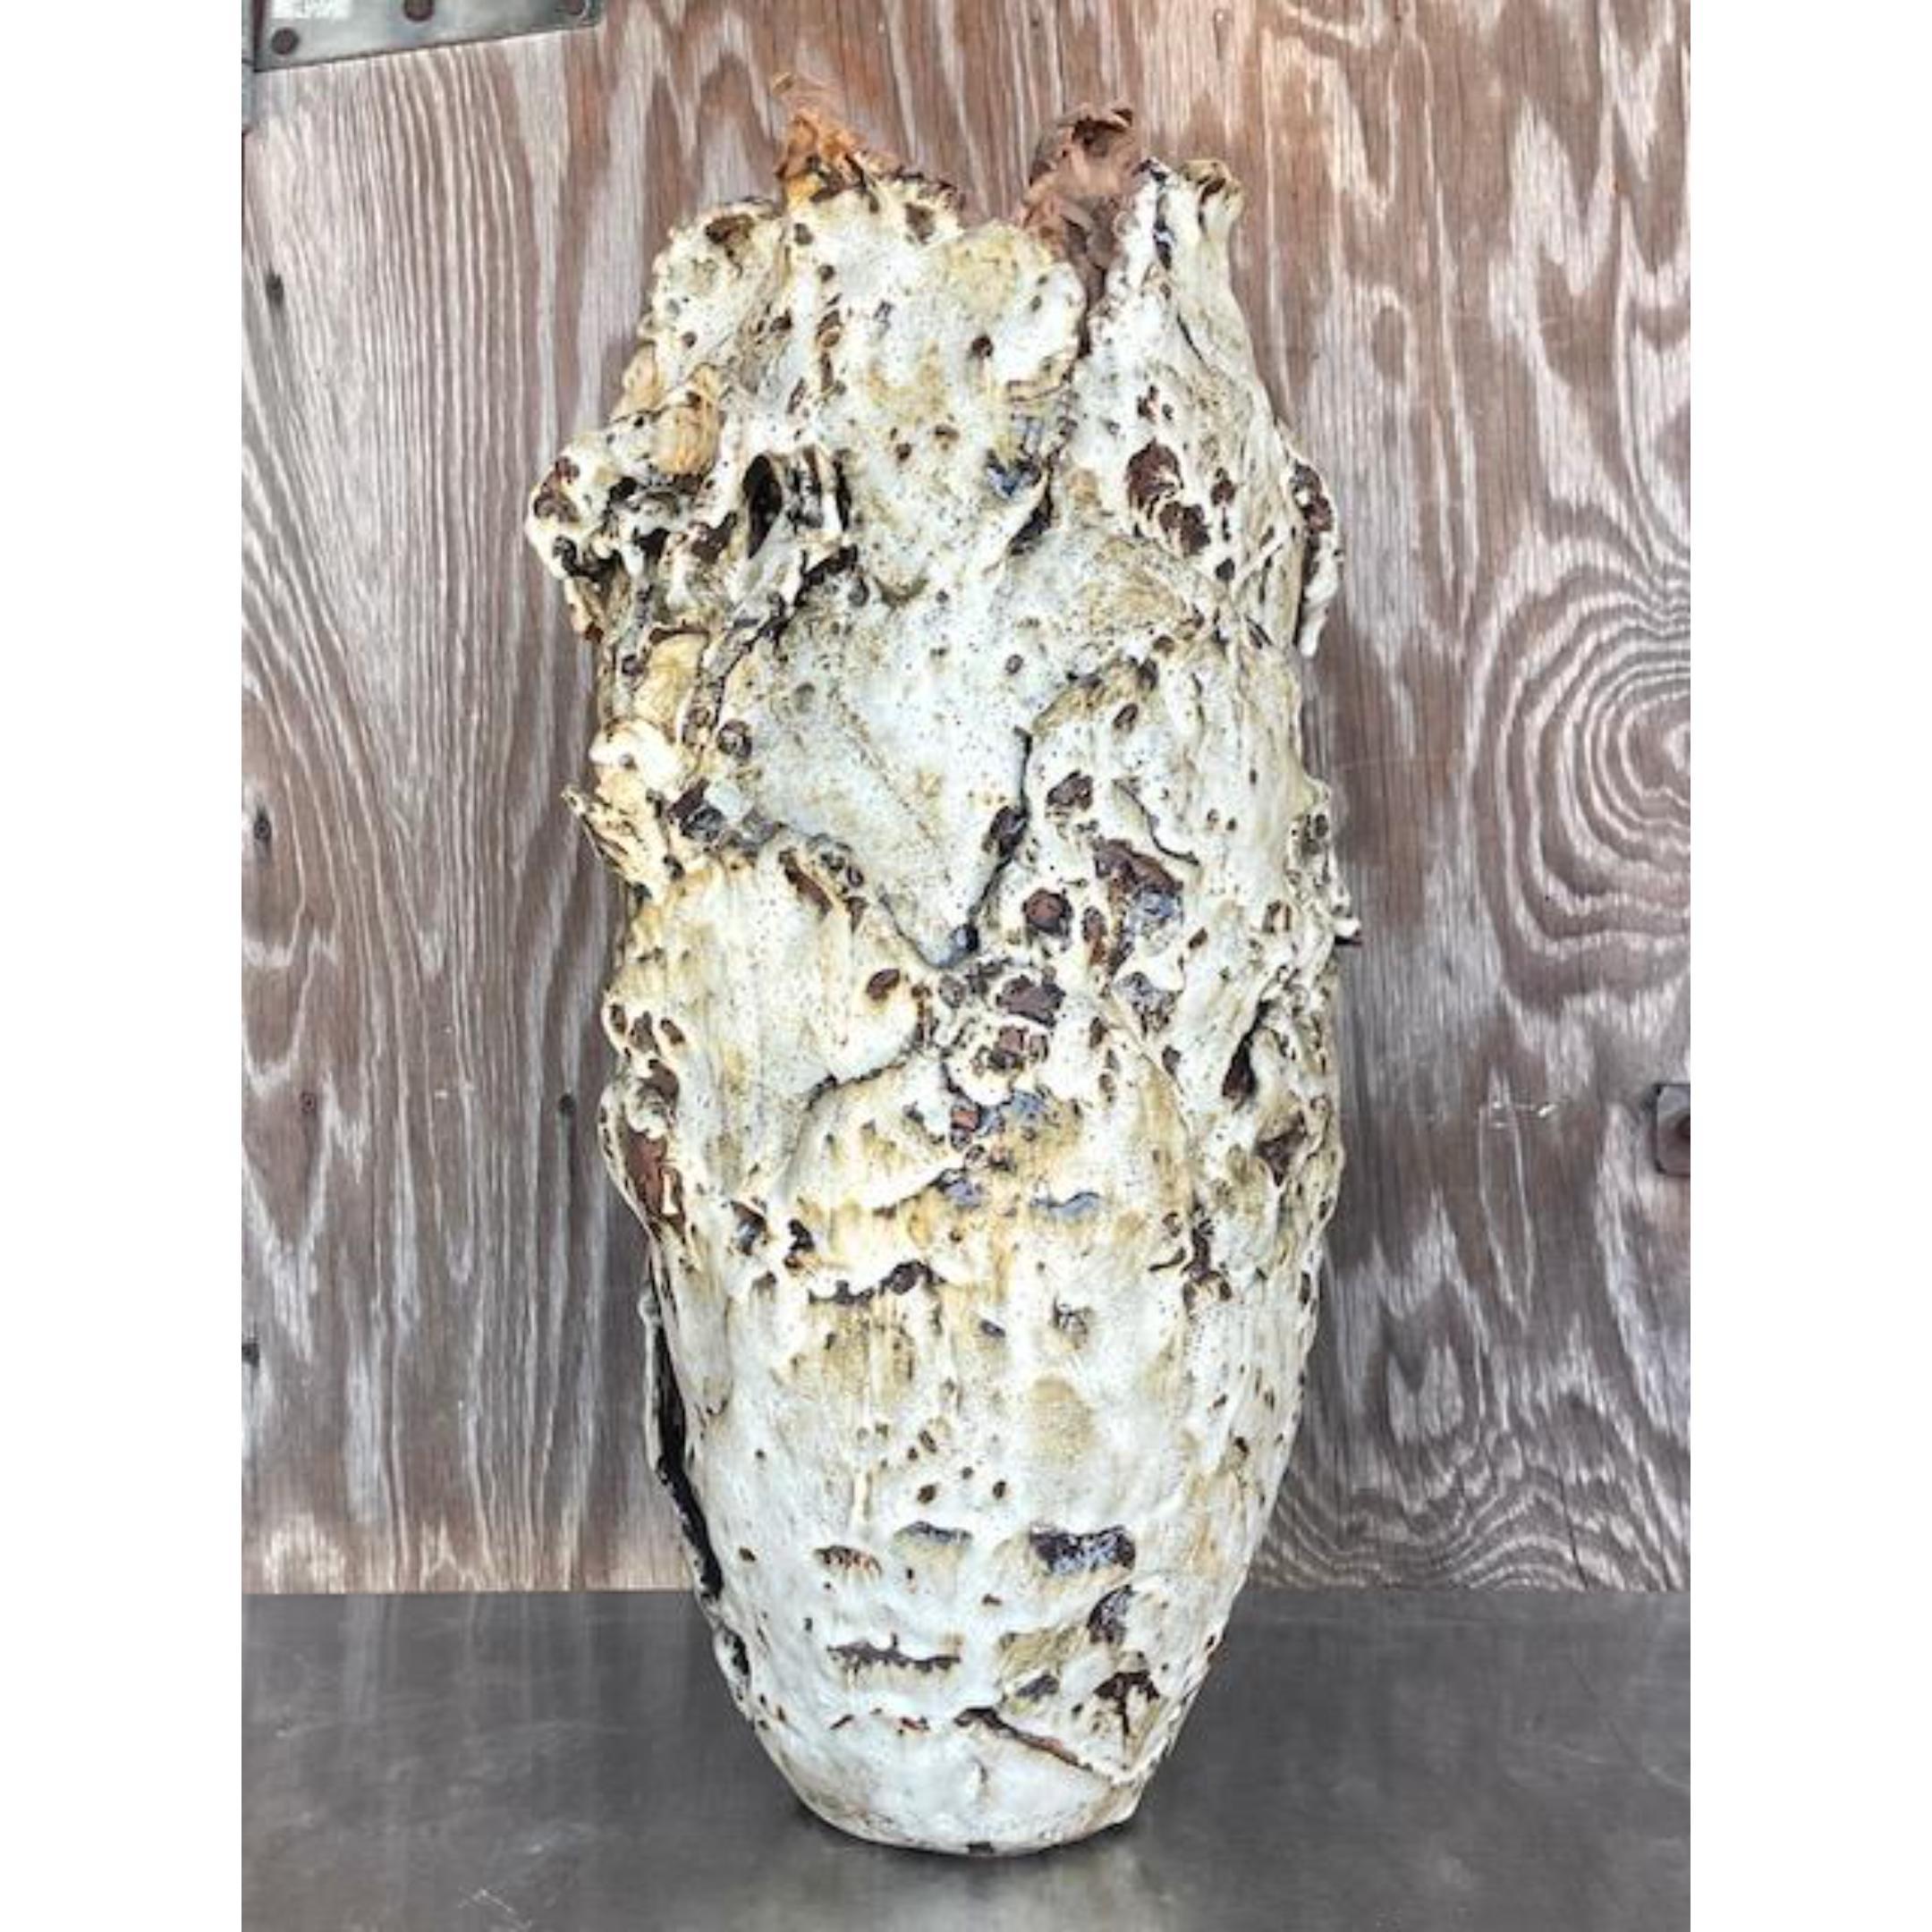 An extraordinary vintage Boho vase. A chic slab built creation with an incredible textured and layered finish. A striking addition to any space. Acquired from a Palm Beach estate.